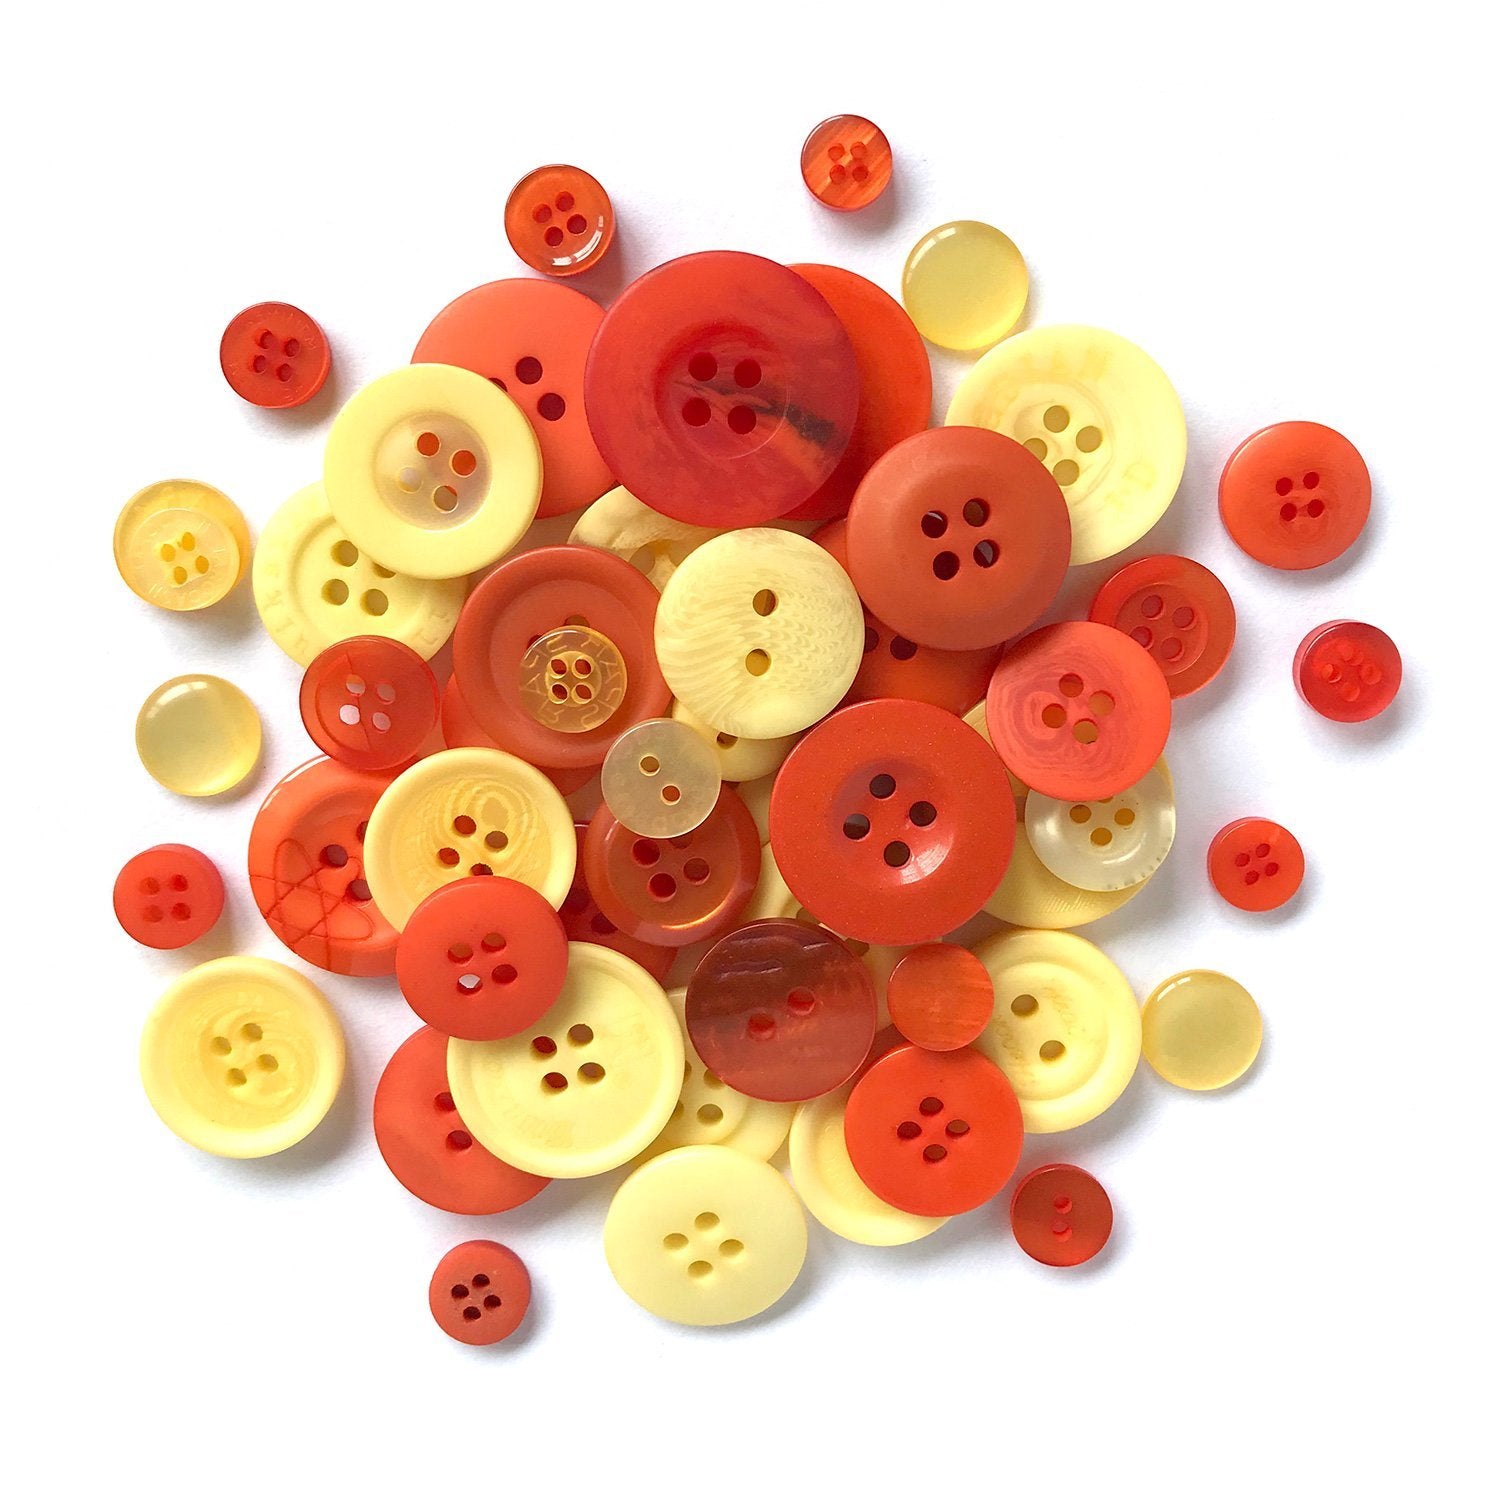  Qovydx 1600Pcs Orange Buttons for Crafts Assorted Sizes Button  Orange in Bulk Orange Craft Buttons Assortment Christmas Buttons : Arts,  Crafts & Sewing